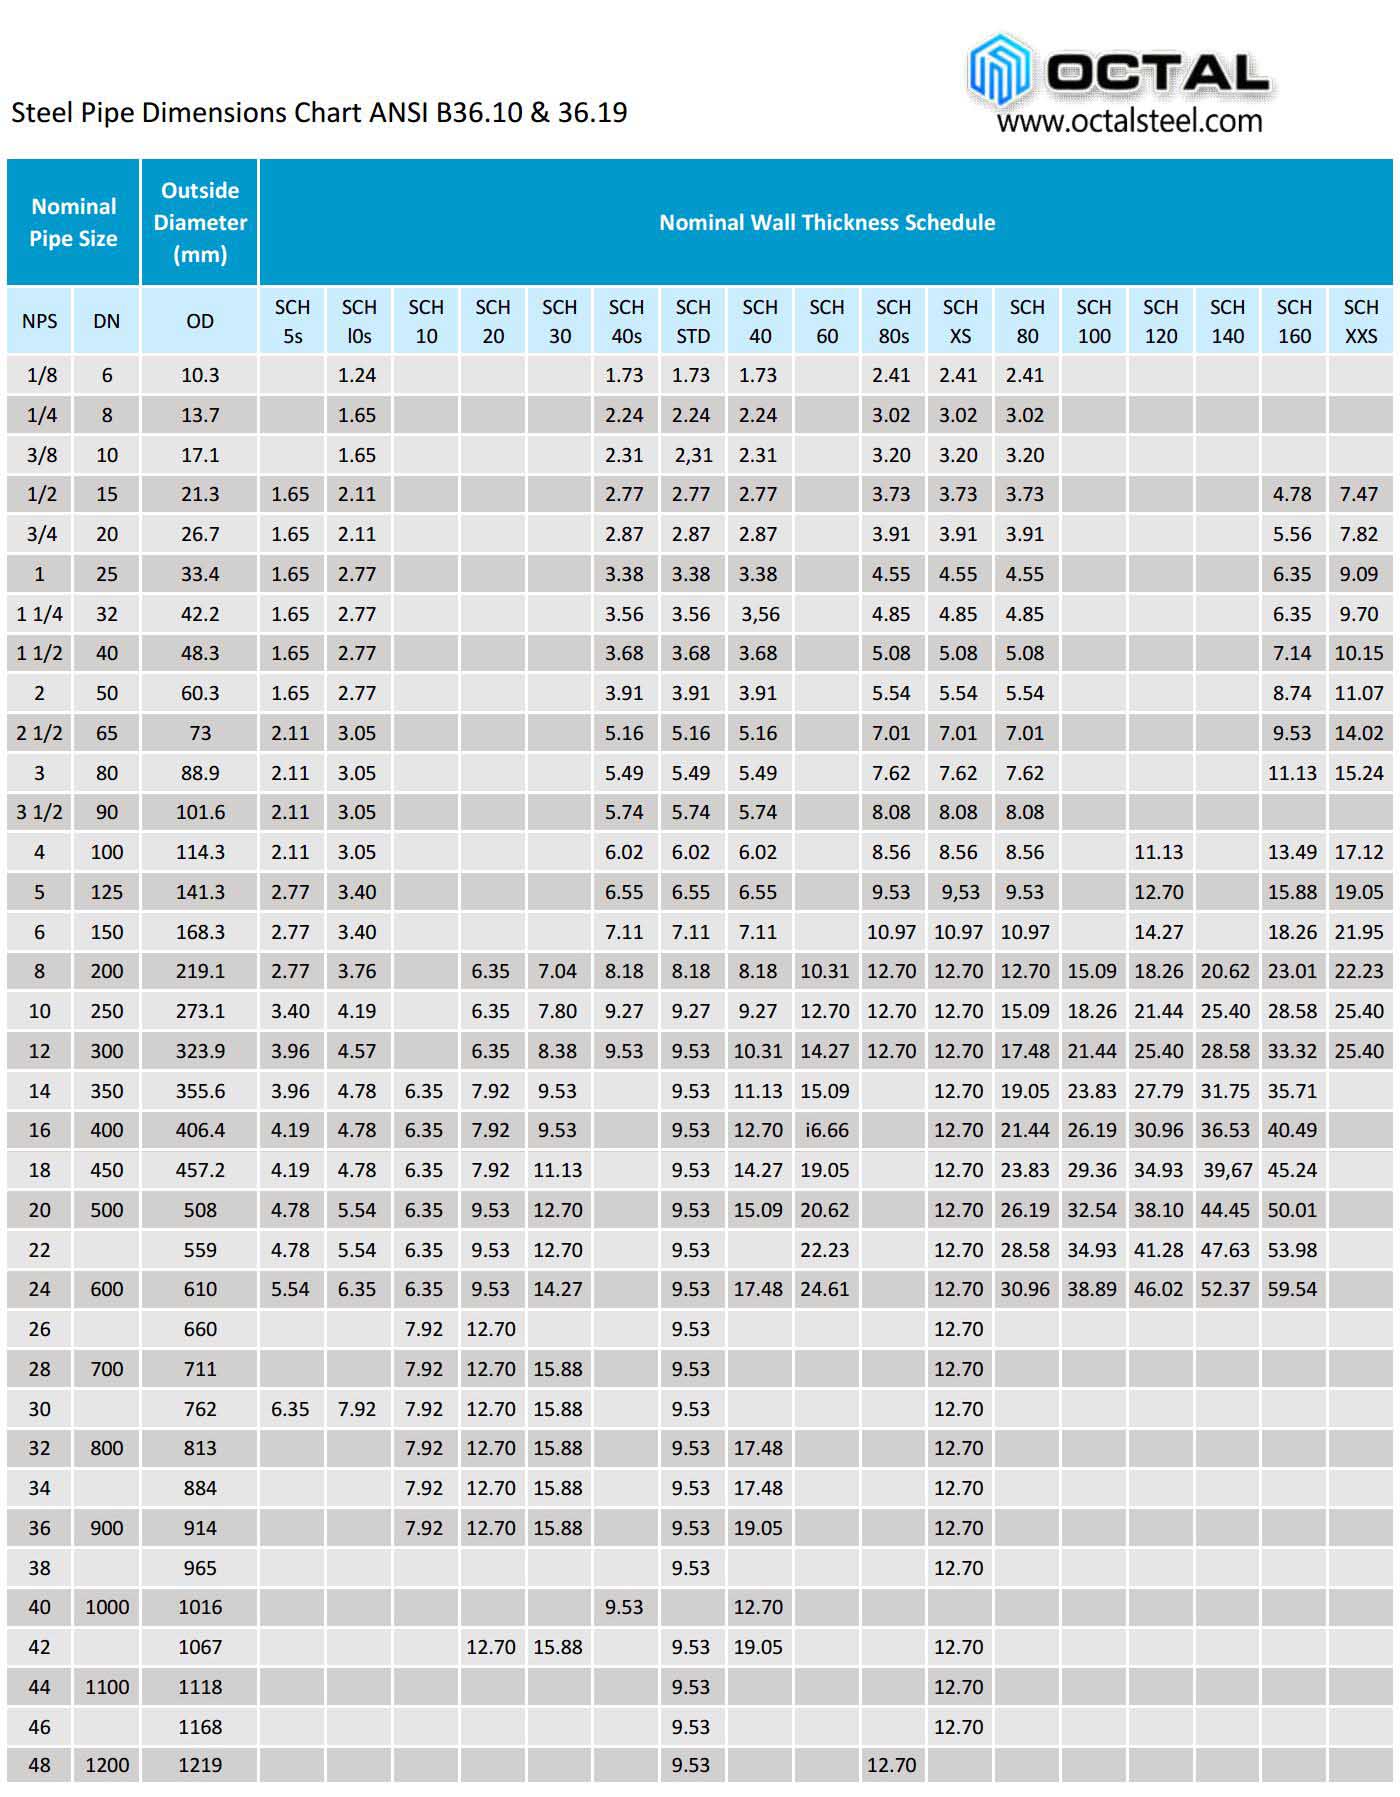 Steel Pipe Dimensions Chart according to ANSI B36.10 and ANSI B36.19